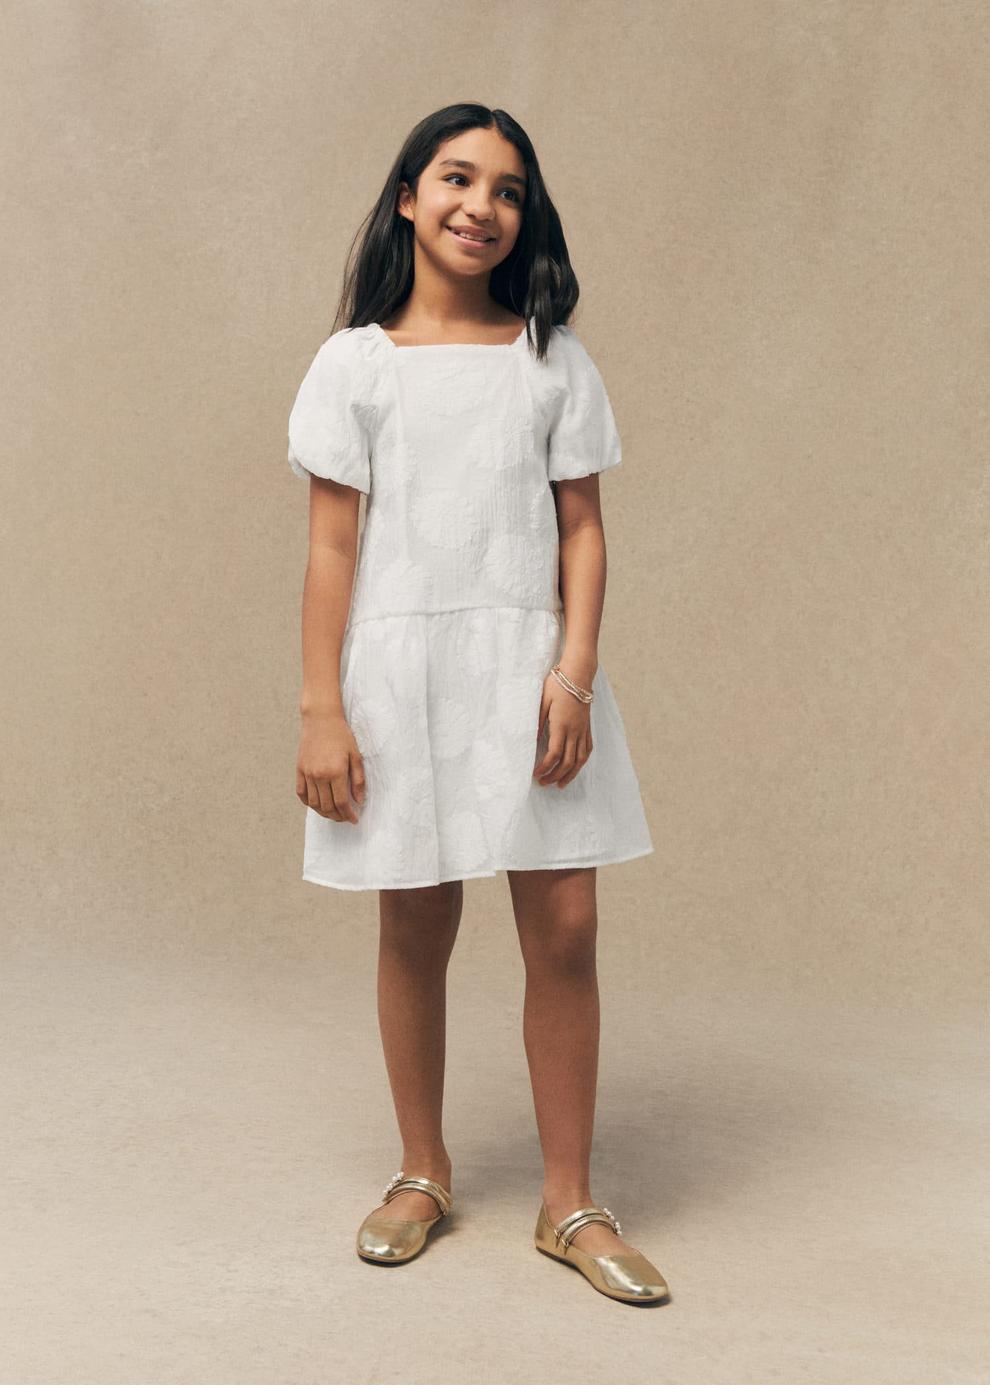 Floral embroidery dress offers at S$ 69.9 in Mango Kids